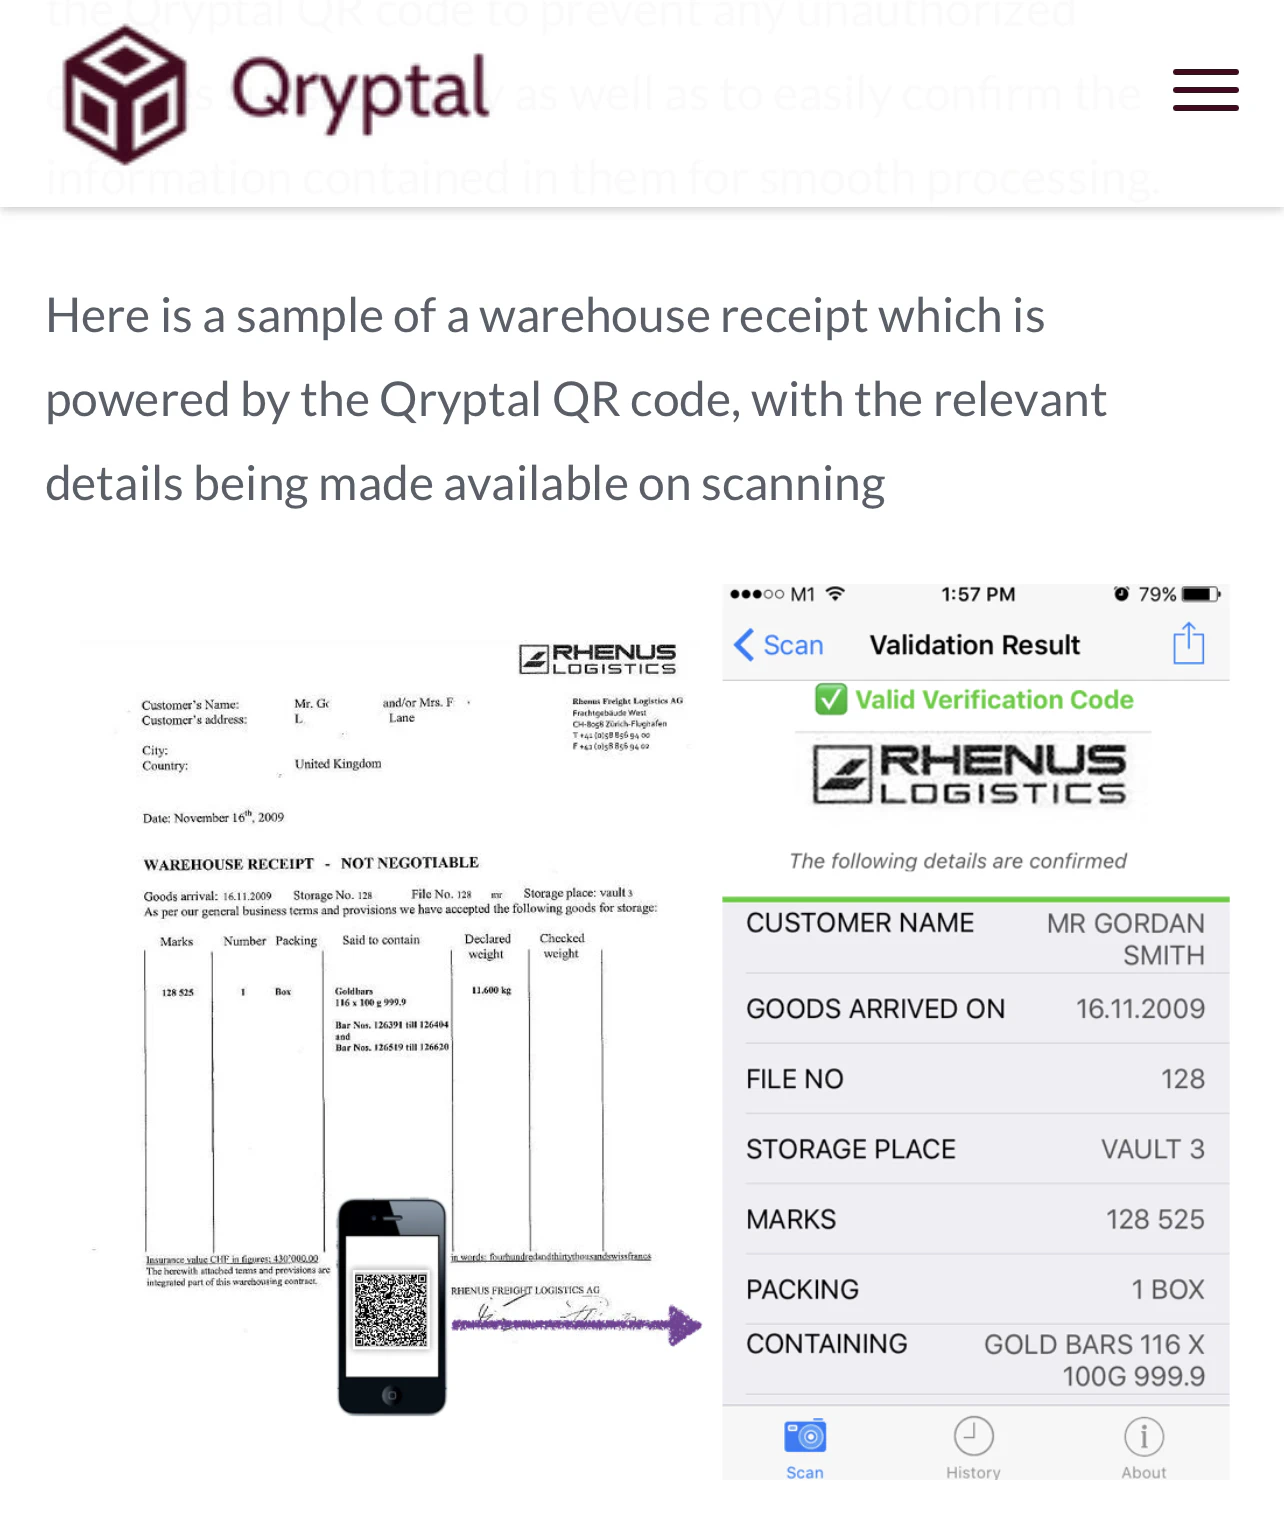 Sample warehouse receipt secured by Qryptal code